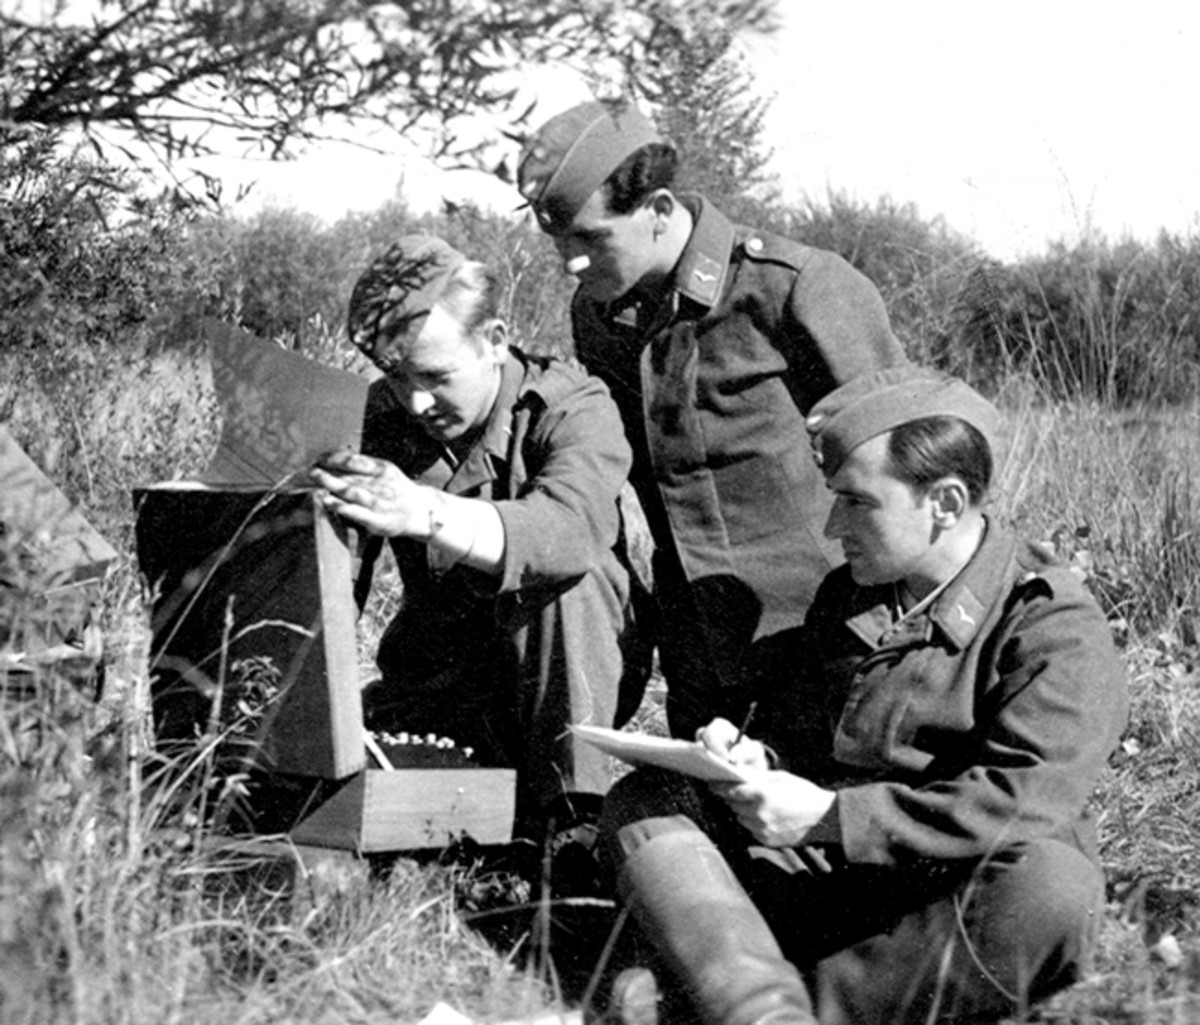 Luftwaffe troops use an Enigma machine. One man types while another records the enciphered or deciphered letters. (Photo courtesy of Helge Fykse, Norway)